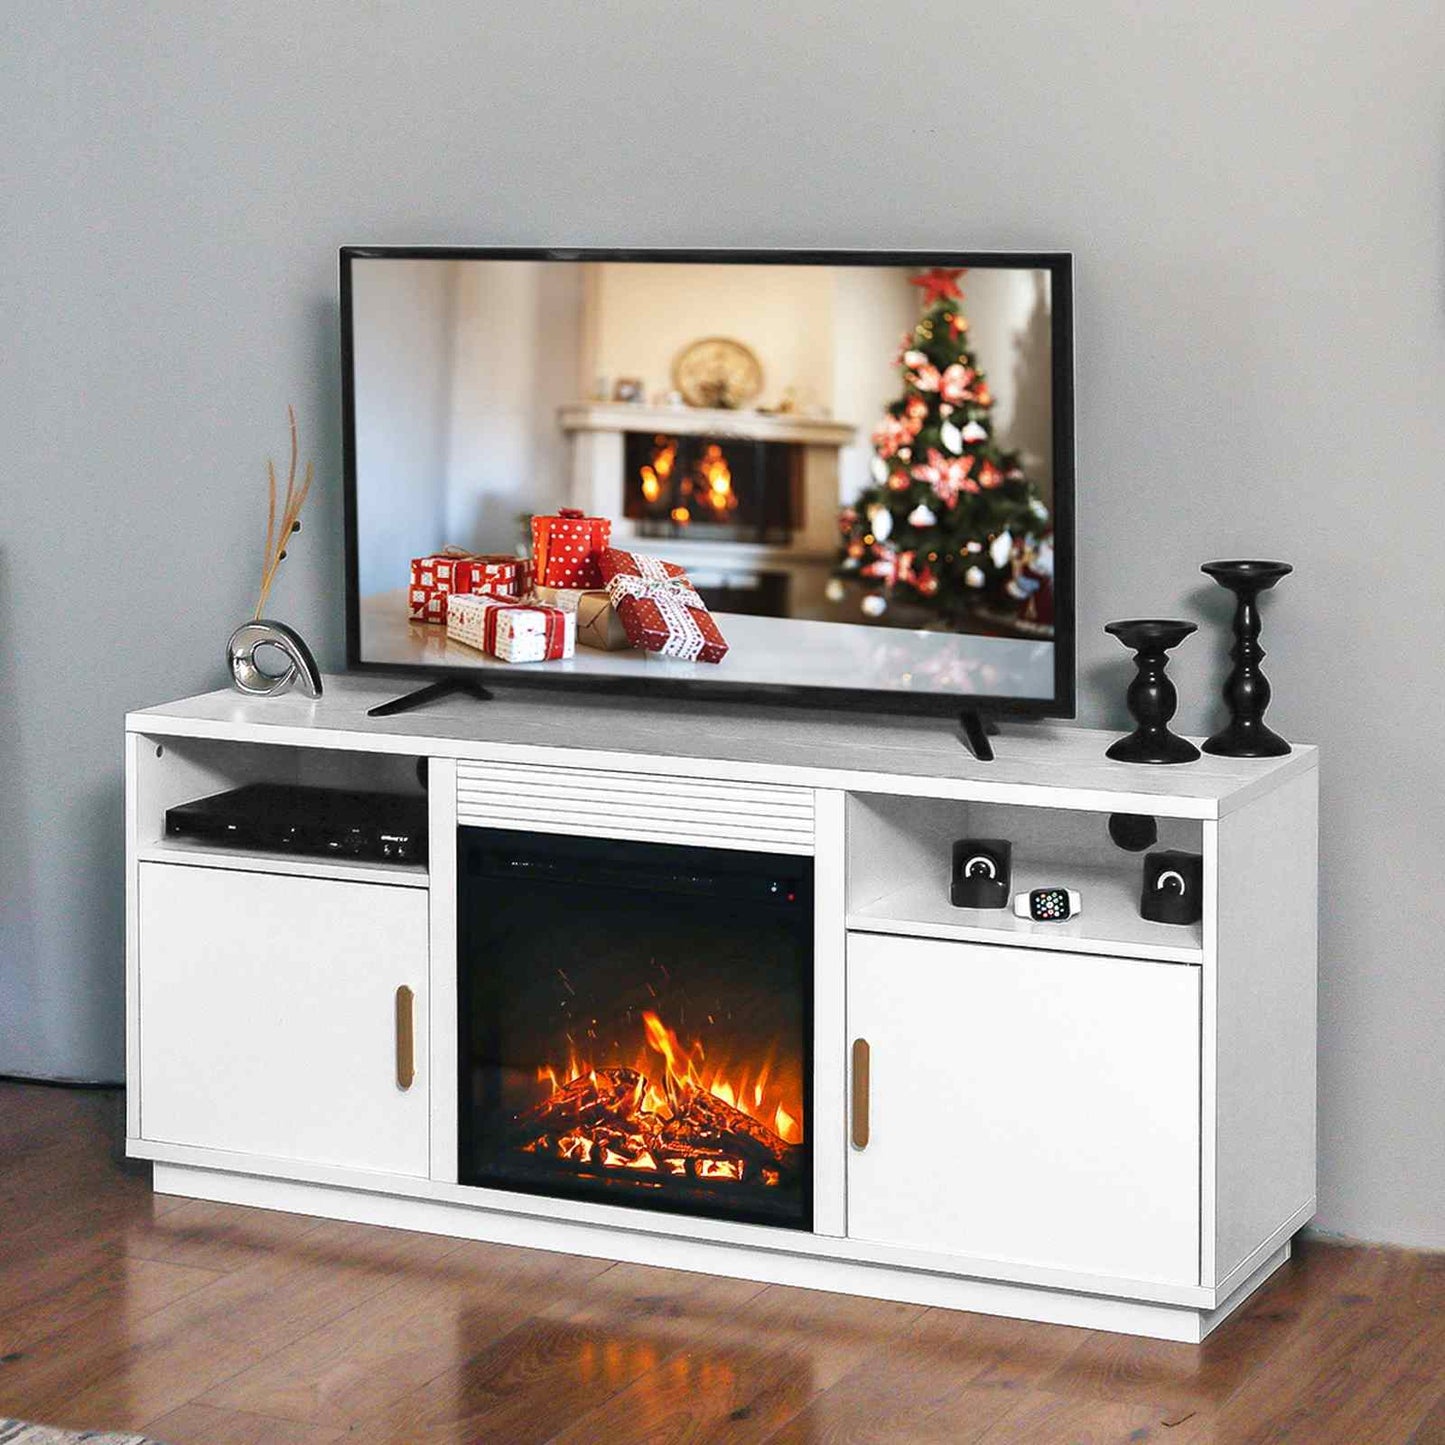 2-IN-1 Design Fireplace TV Stand for TVs up to 63'' Modern Entertainment Center Adjustable Shelf with Home Fireplace US STOCK